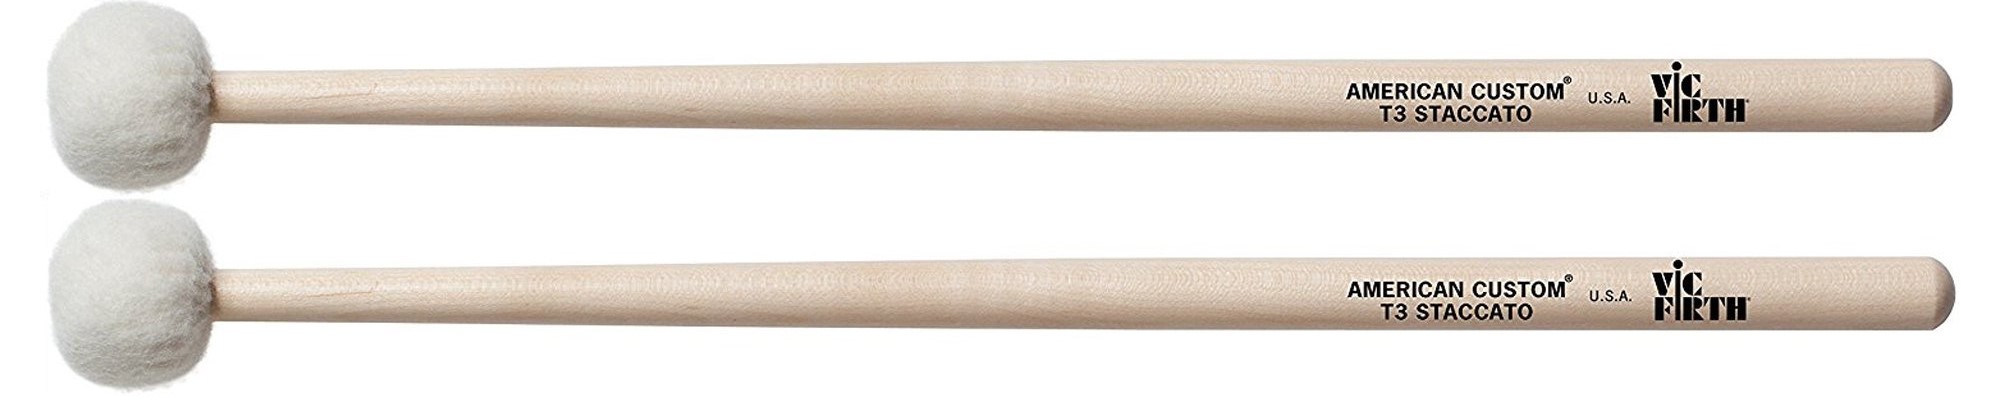 vic firth mallets